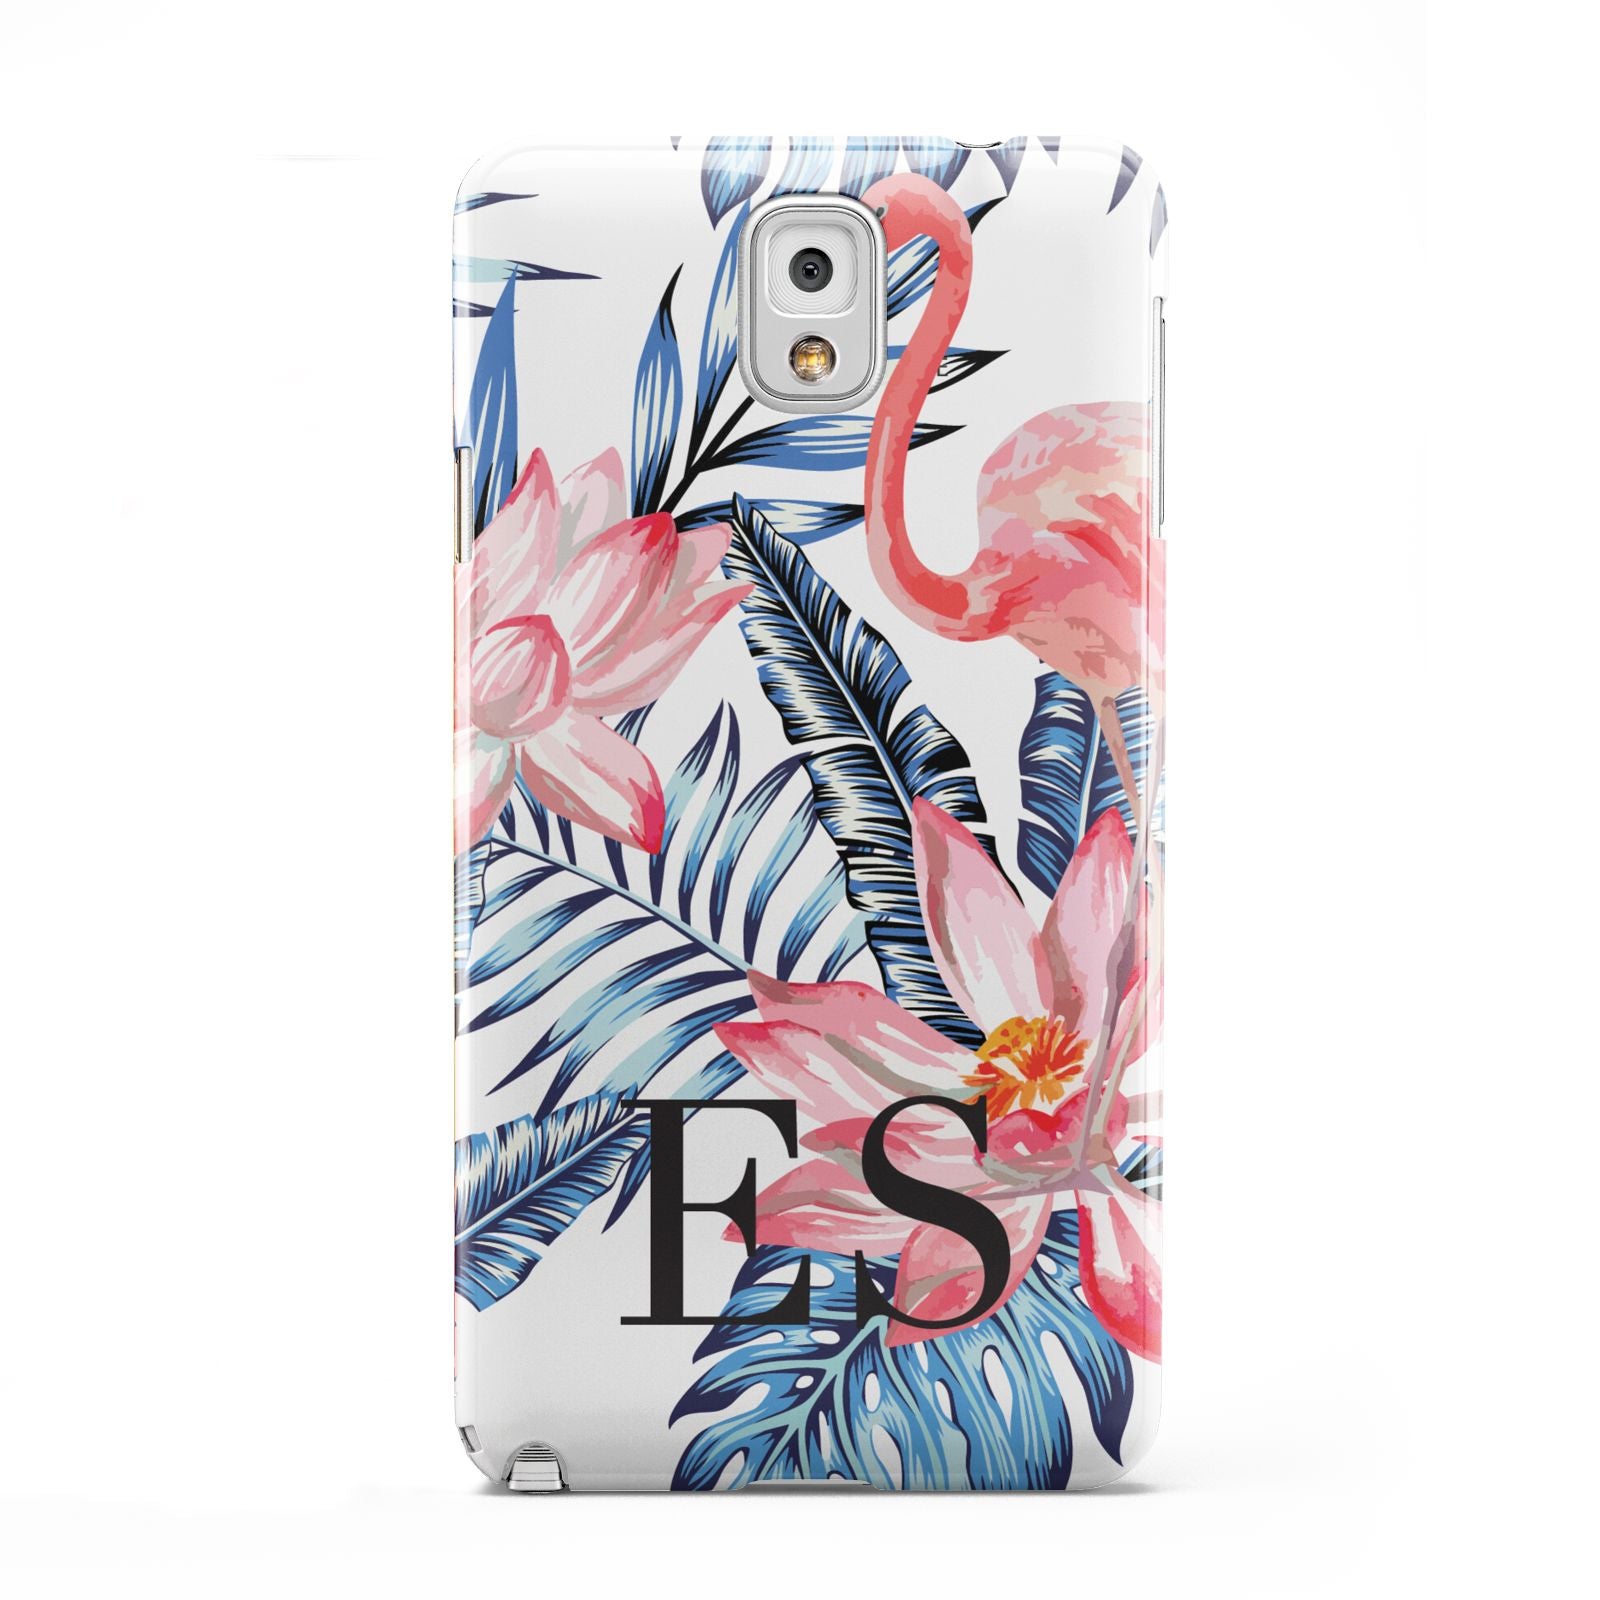 Blue Leaves Pink Flamingos Samsung Galaxy Note 3 Case